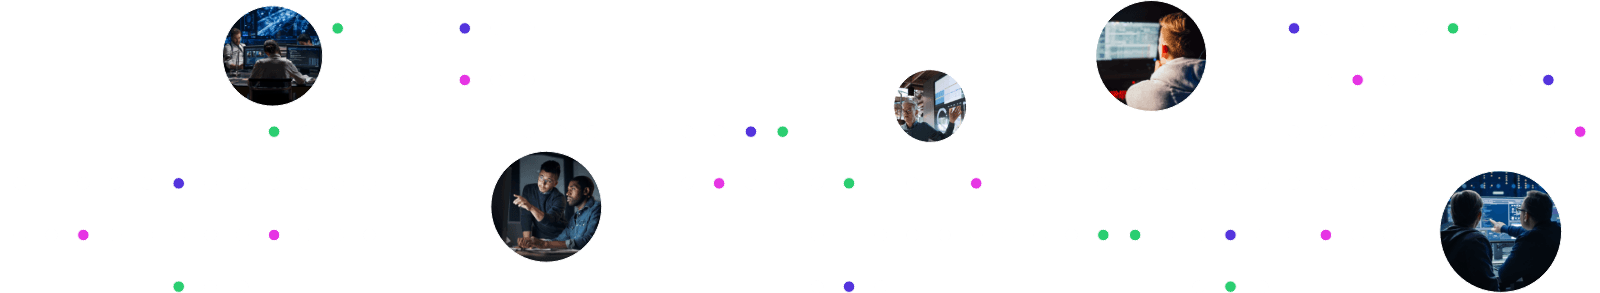 digital multicolored dots texture with photos of people in the office